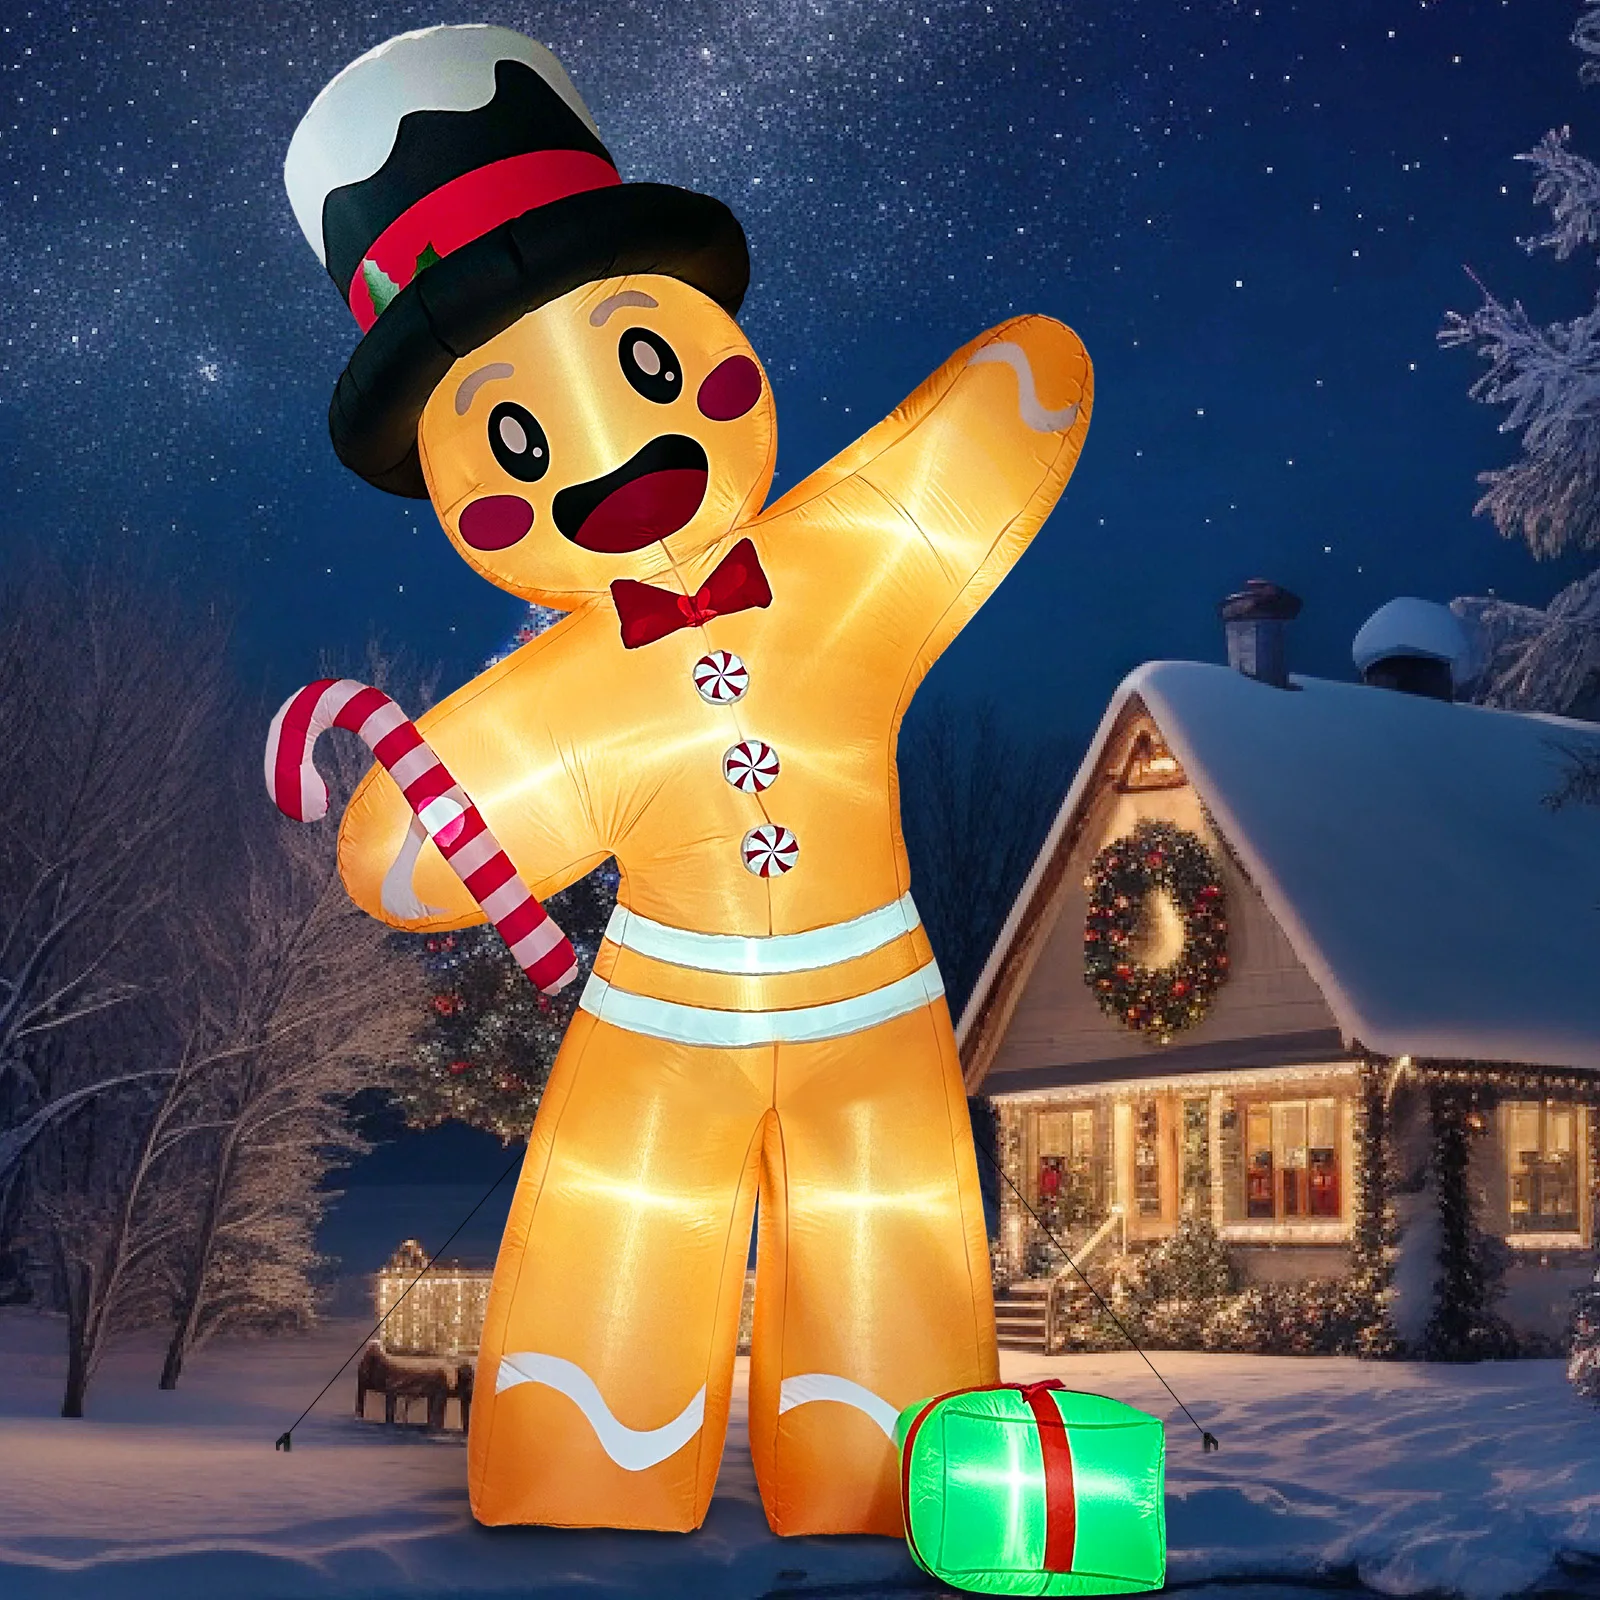 OurWarm 12FT Gingerbread Man Christmas Inflatables Christmas Inflatables Outdoor Decorations Blow Up for Yard Lawn Decorations